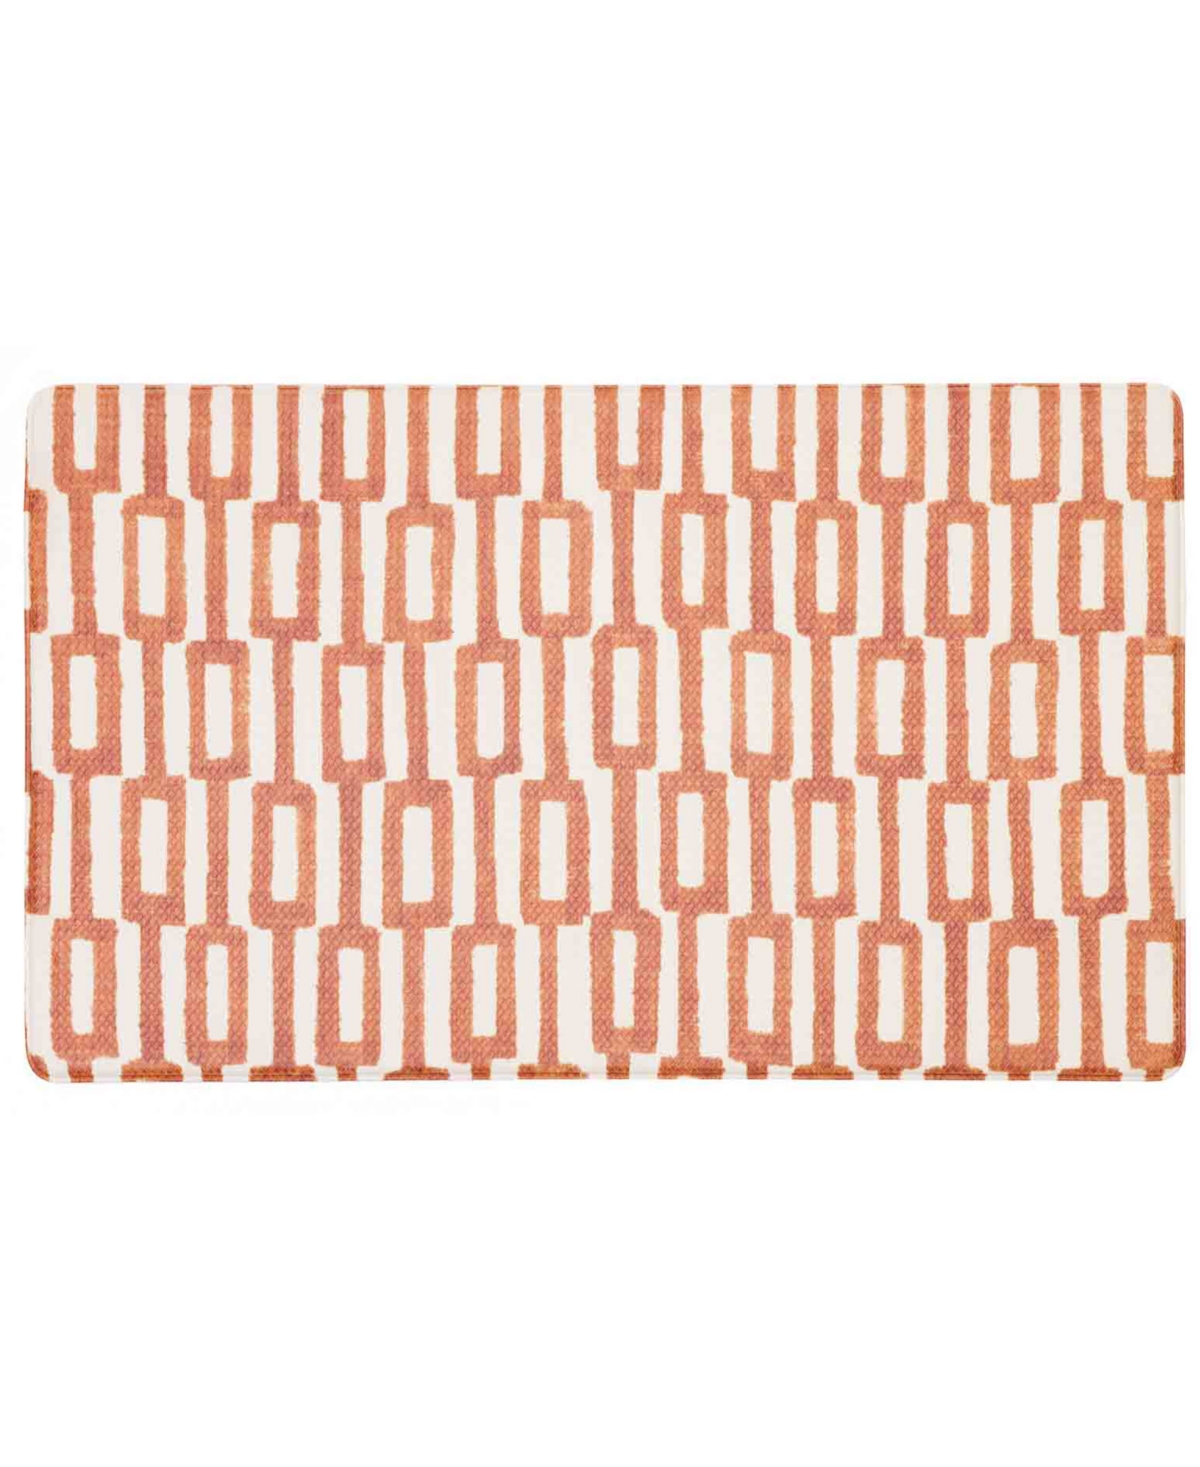 Tommy Bahama Printed Polyvinyl Chloride Fatigue-resistant Mat, 20" X 36" In Chain Link Beige